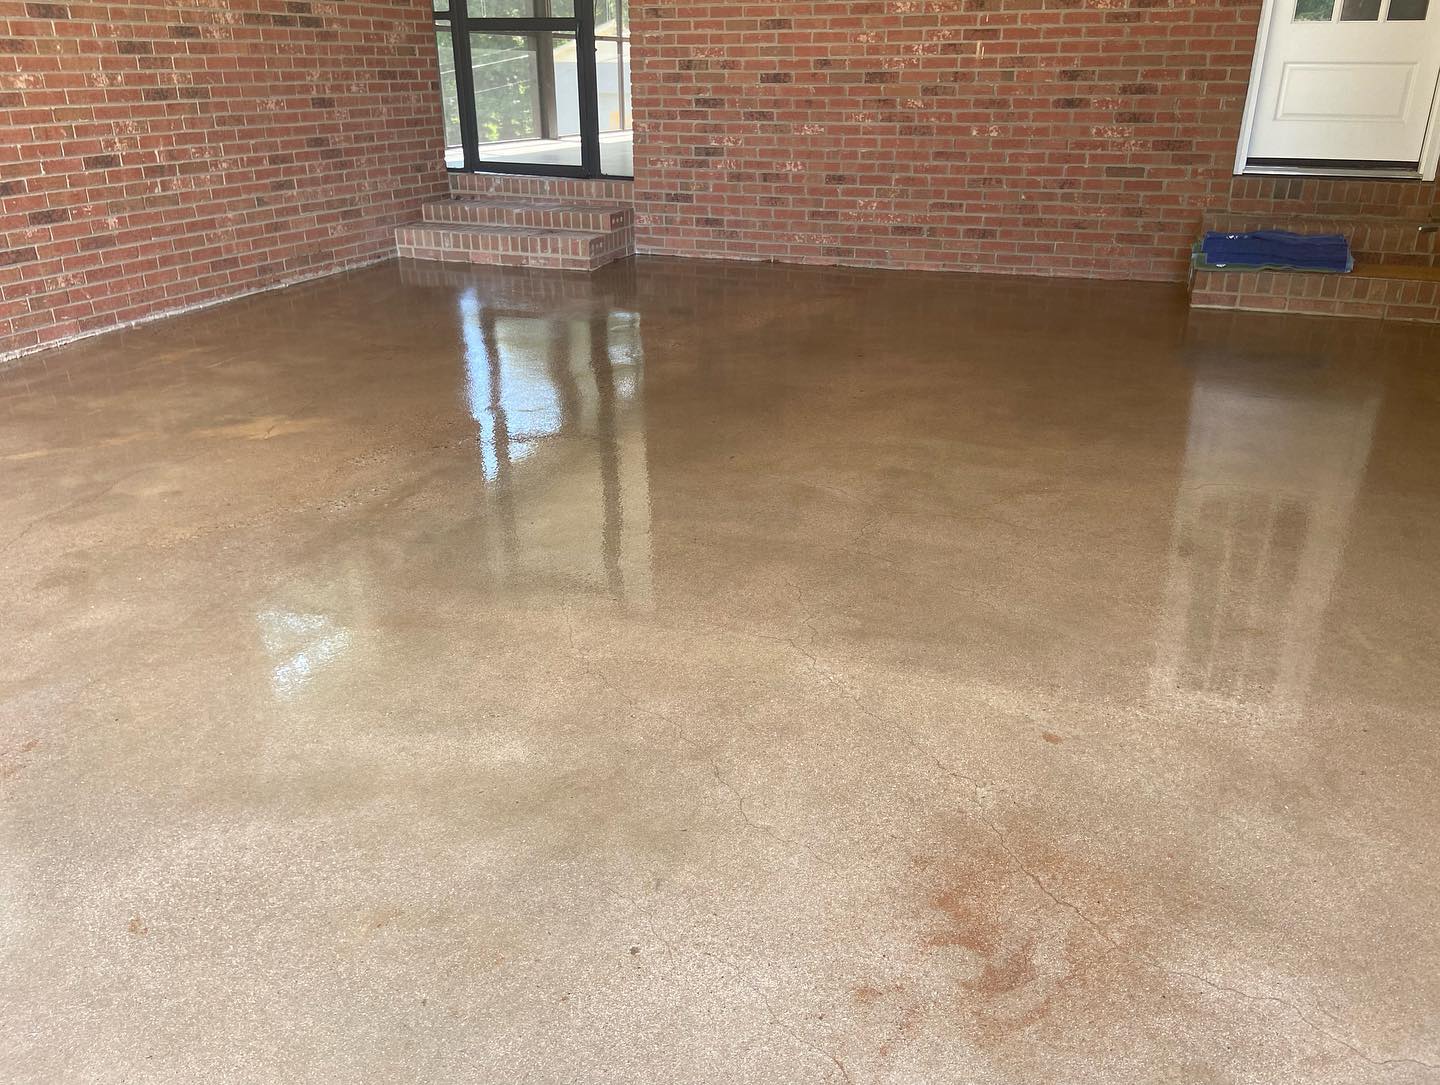 a concrete floor in a room with a brick wall .